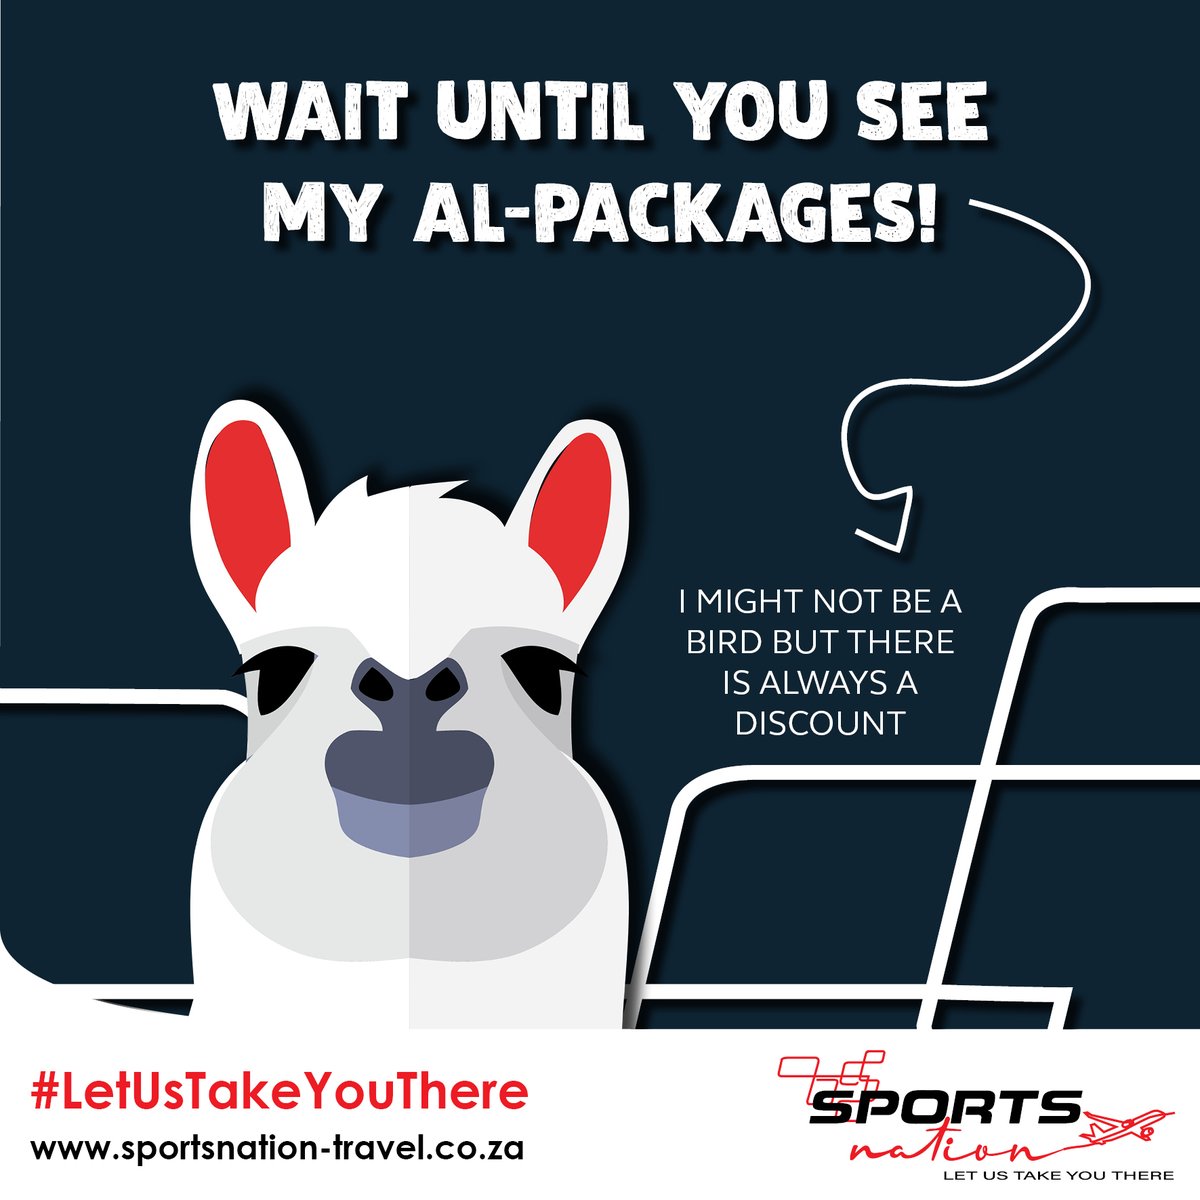 You asked and we listened! Adding a few limited edition online only Match Breaks to the mix. 

Check them out here: zcu.io/N0Yh

#Sportsnation #SportsTravel #RWC2023 #AlPackages #AlpacaMyBags #RugbyWorldCup #France2023 #LetUsTakeYouThere